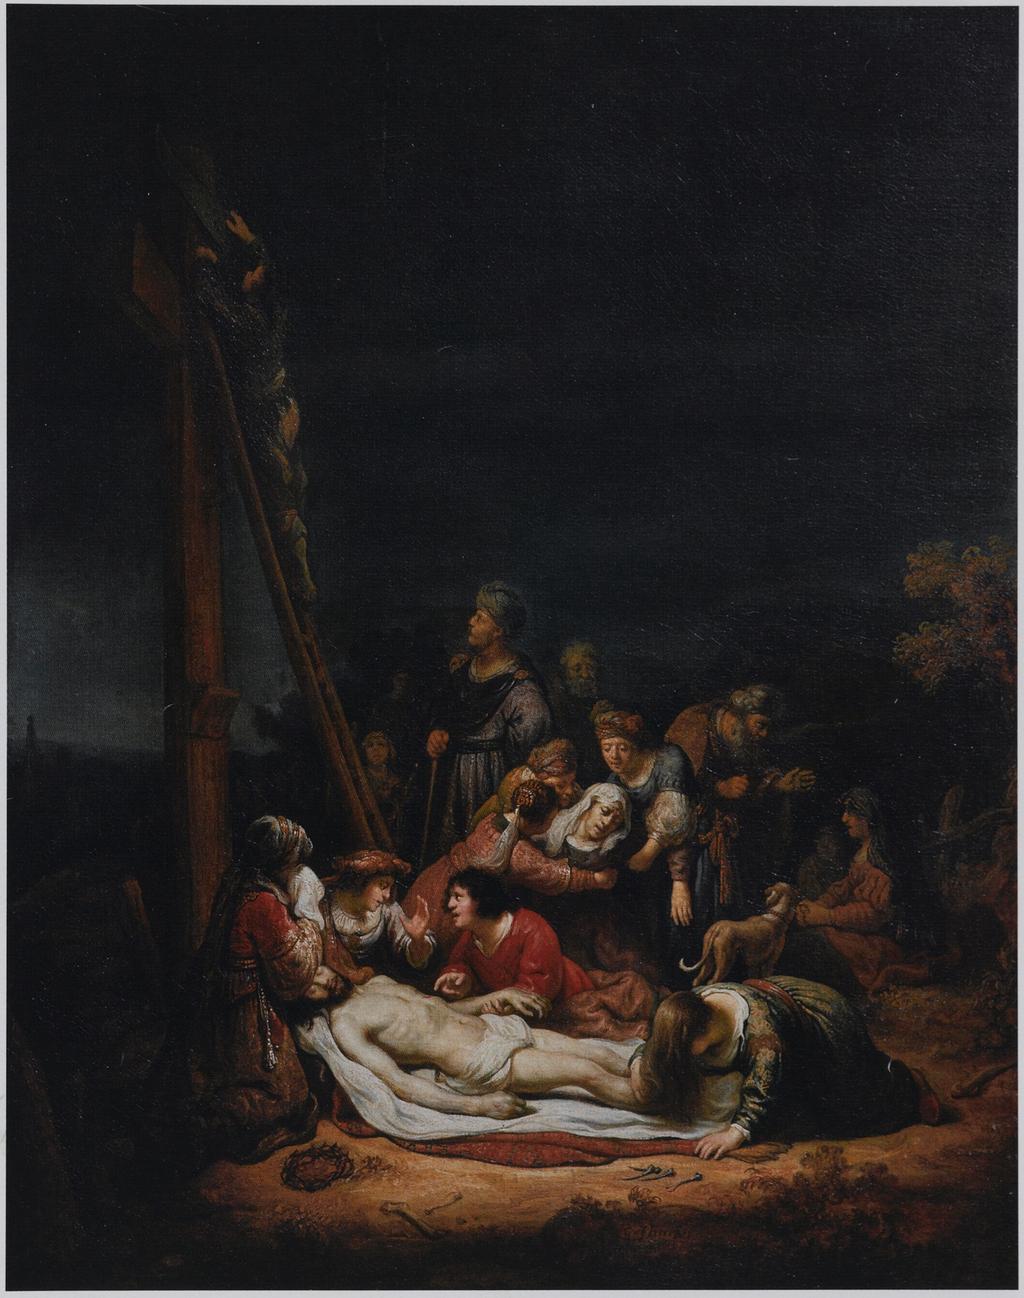 The torso is ensconced in a brown garment, which blends into the color of the background, and so the viewer s eye comes to rest on the man s face, lit from the upper left.